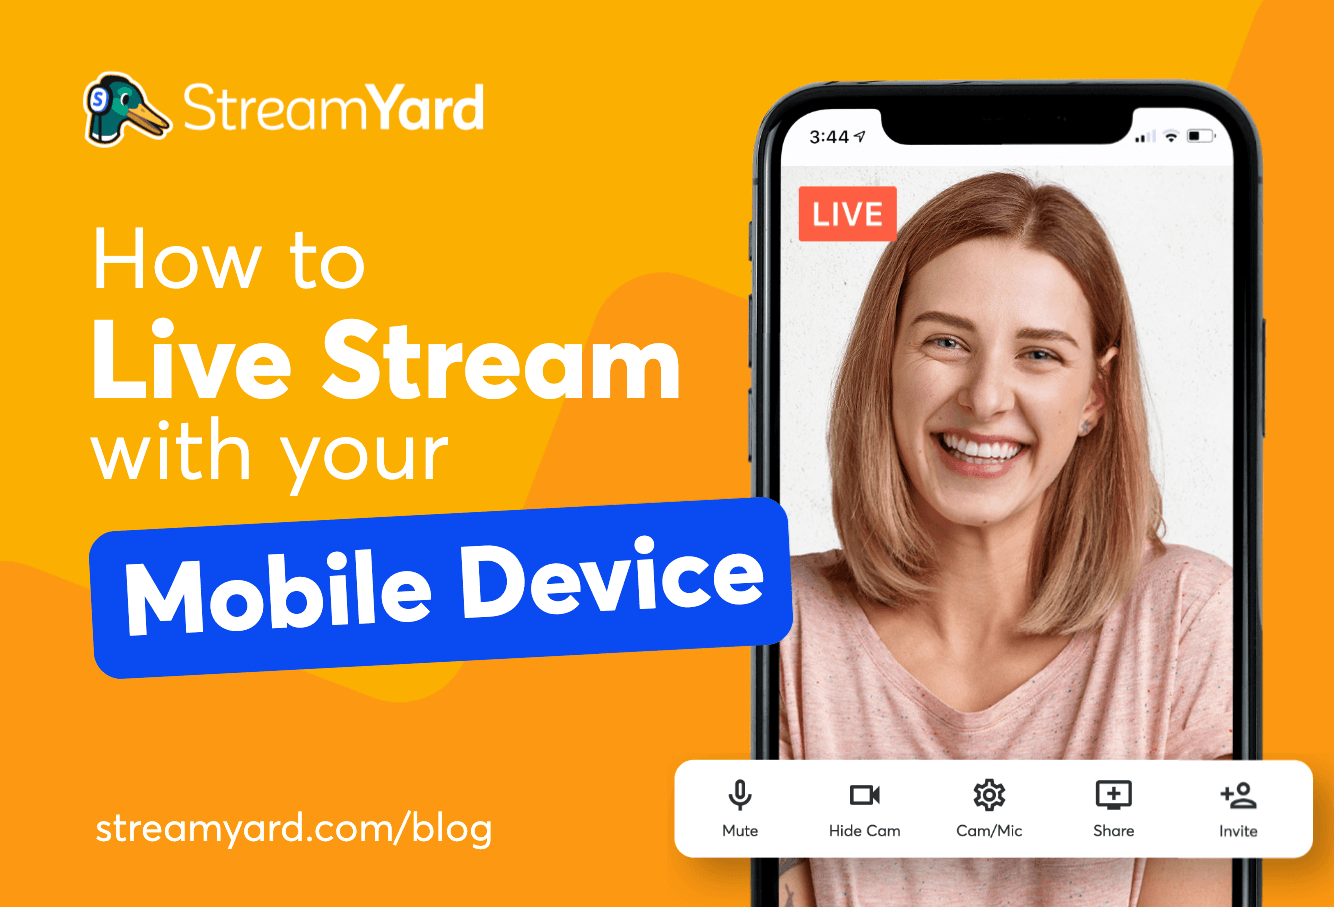 Struggling to produce live streams on the go? Learn how to live stream from your mobile device using this quick guide and go live from wherever you are.